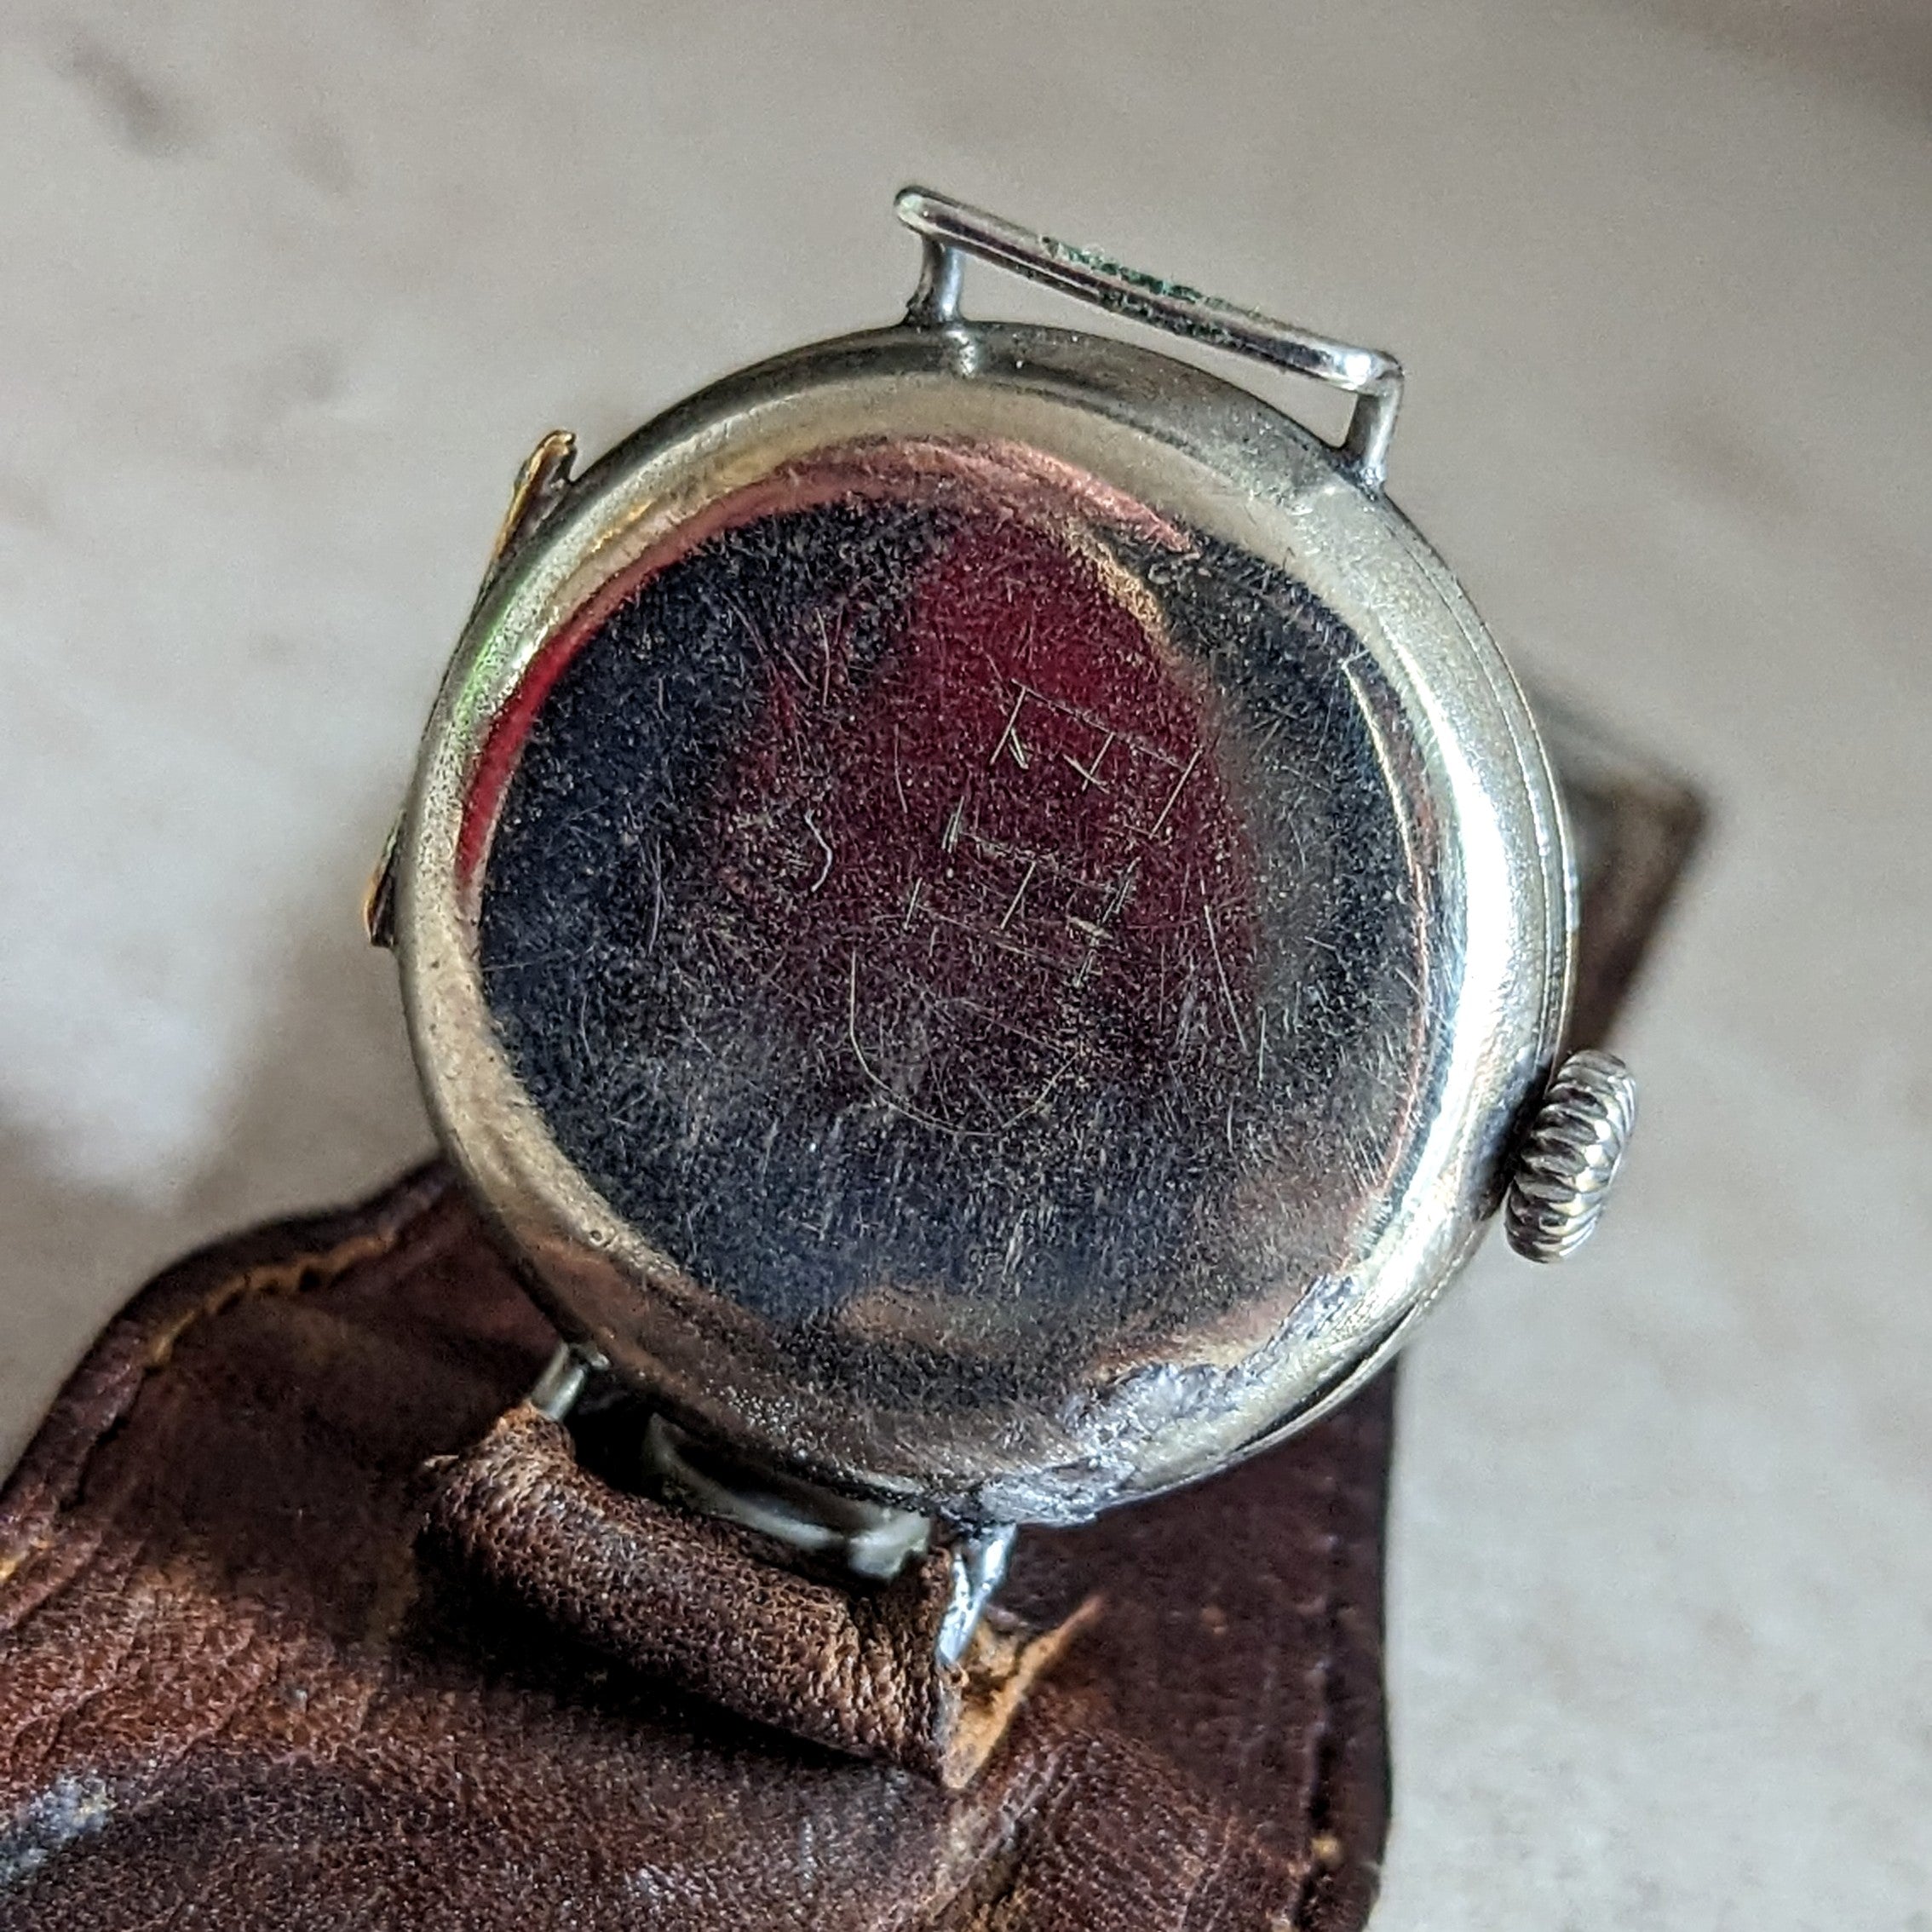 AMBULANCE Red Cross Trench Watch WWI Doctor’s Wristwatch by Marvin Watch Co.